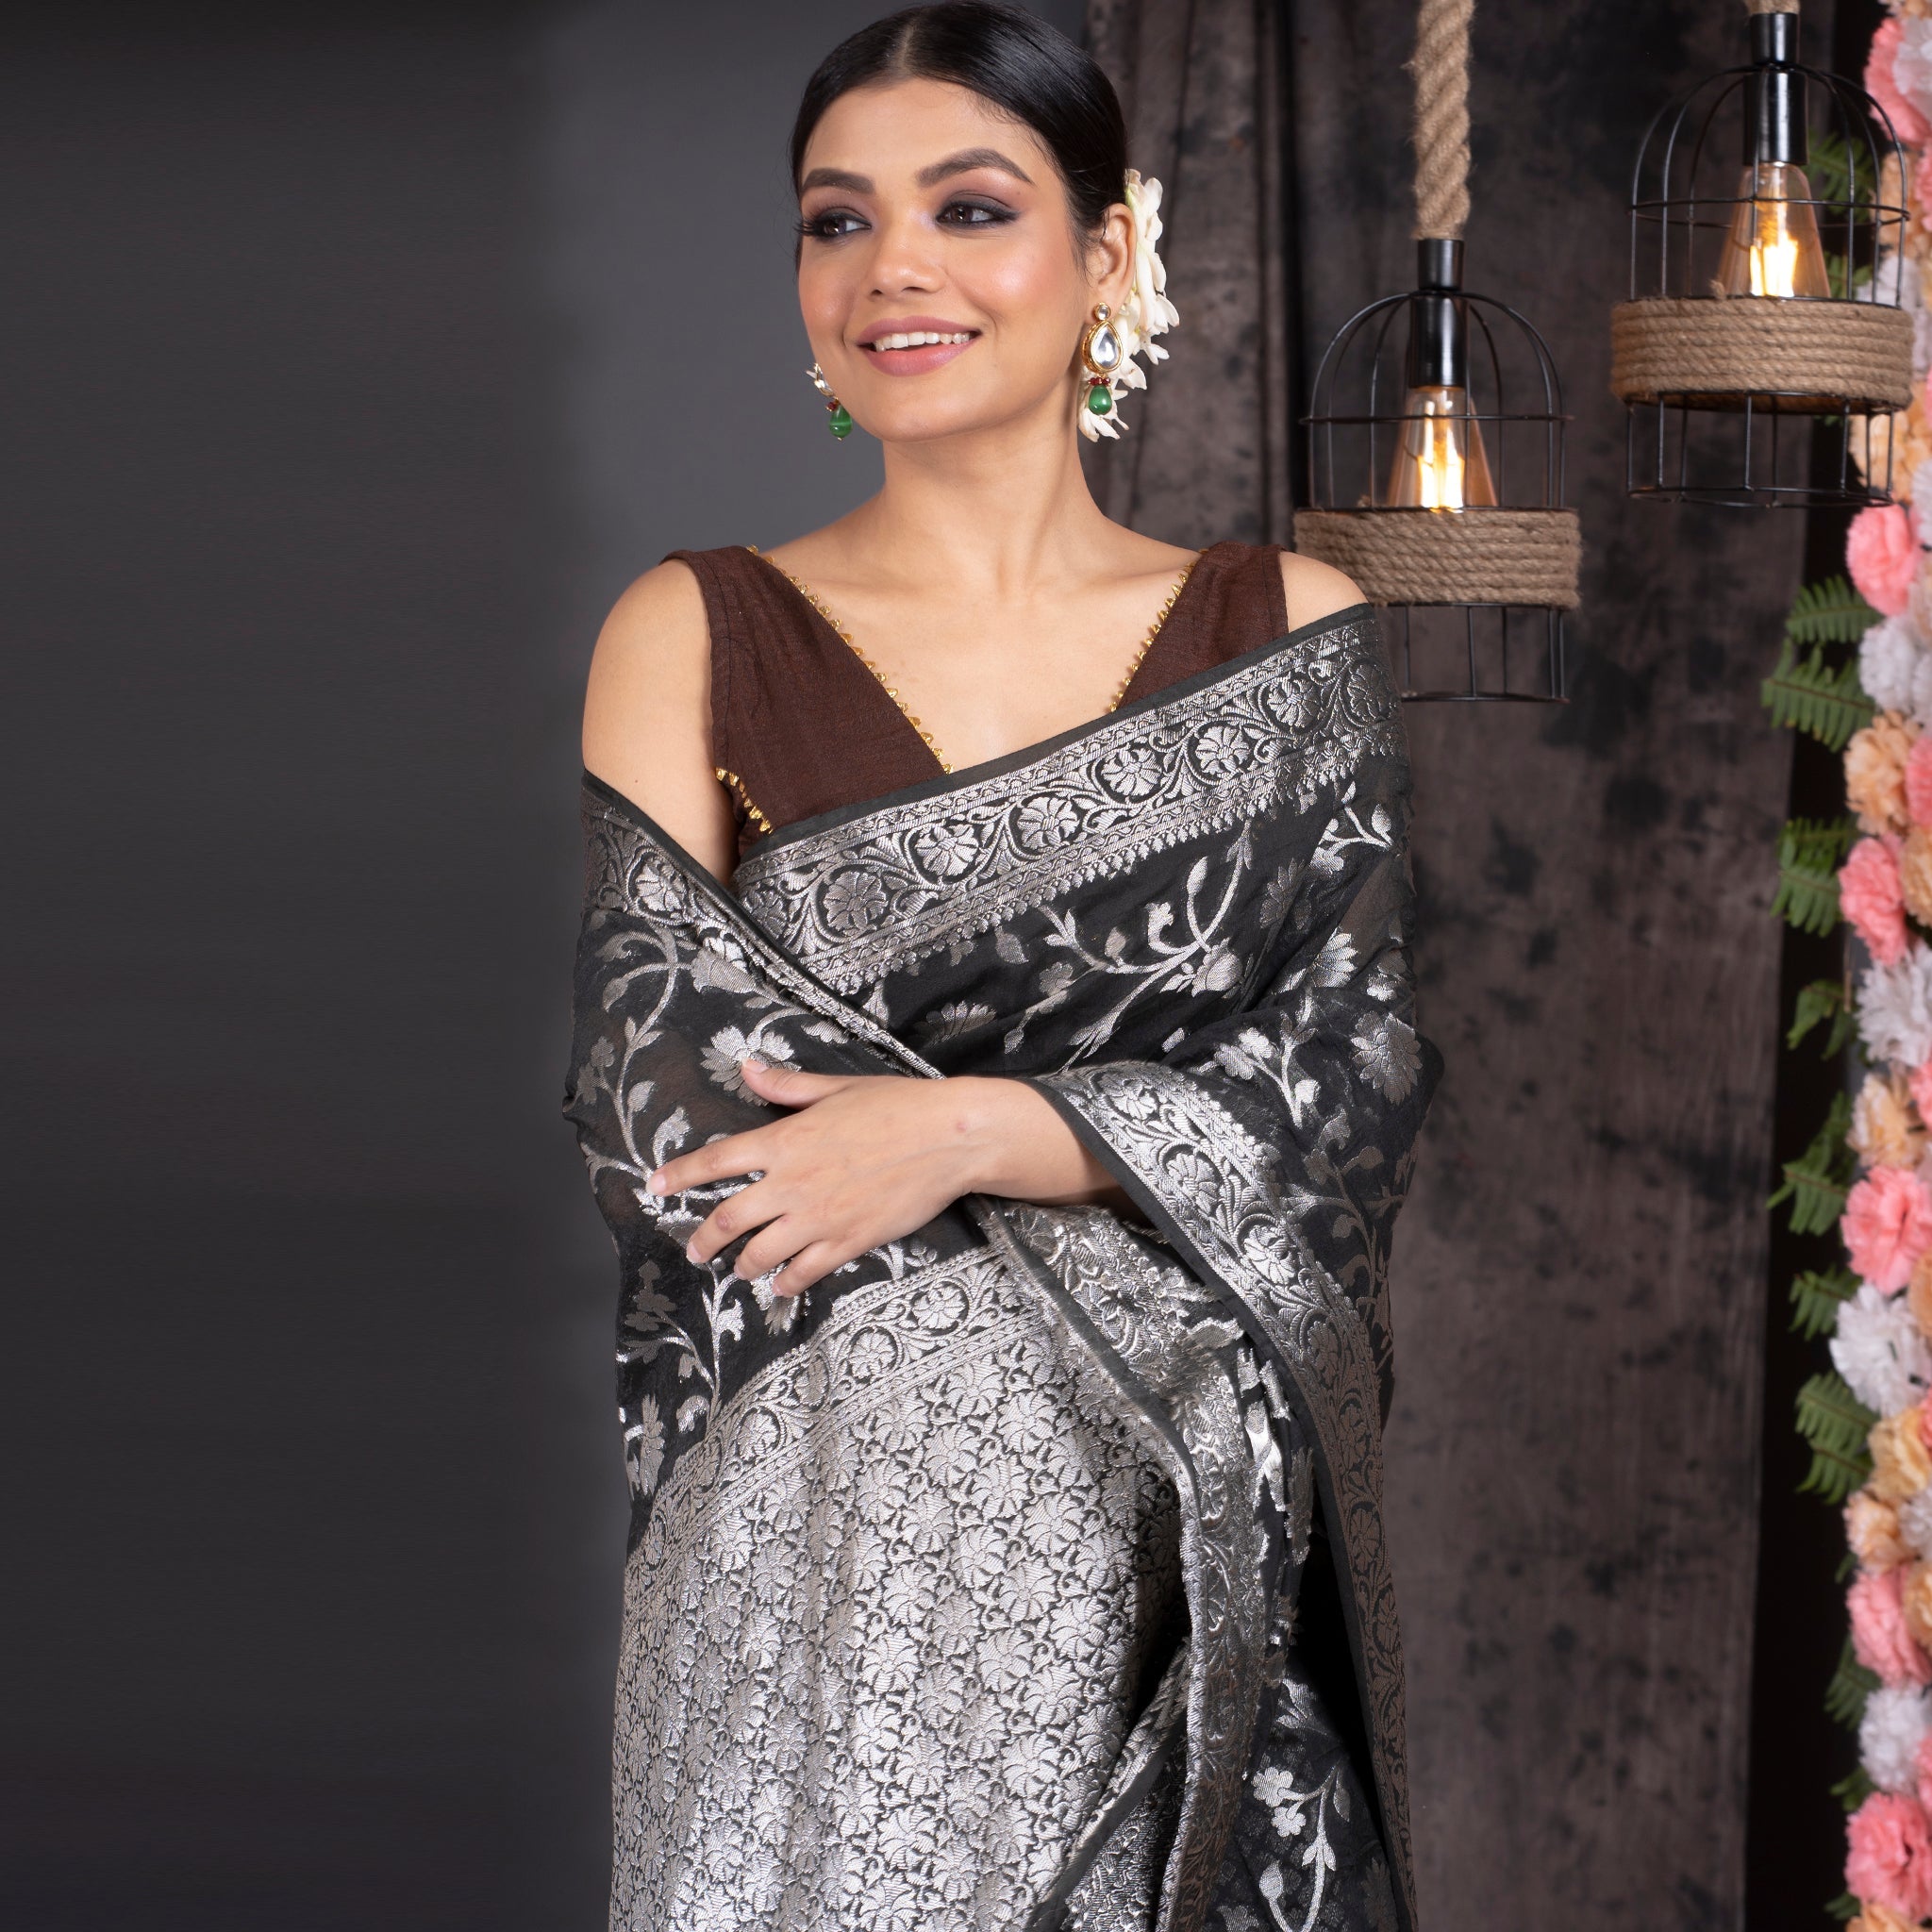 Women's Black Pure Georgette Saree With Antique Silver Jaal Border And Pallu - Boveee